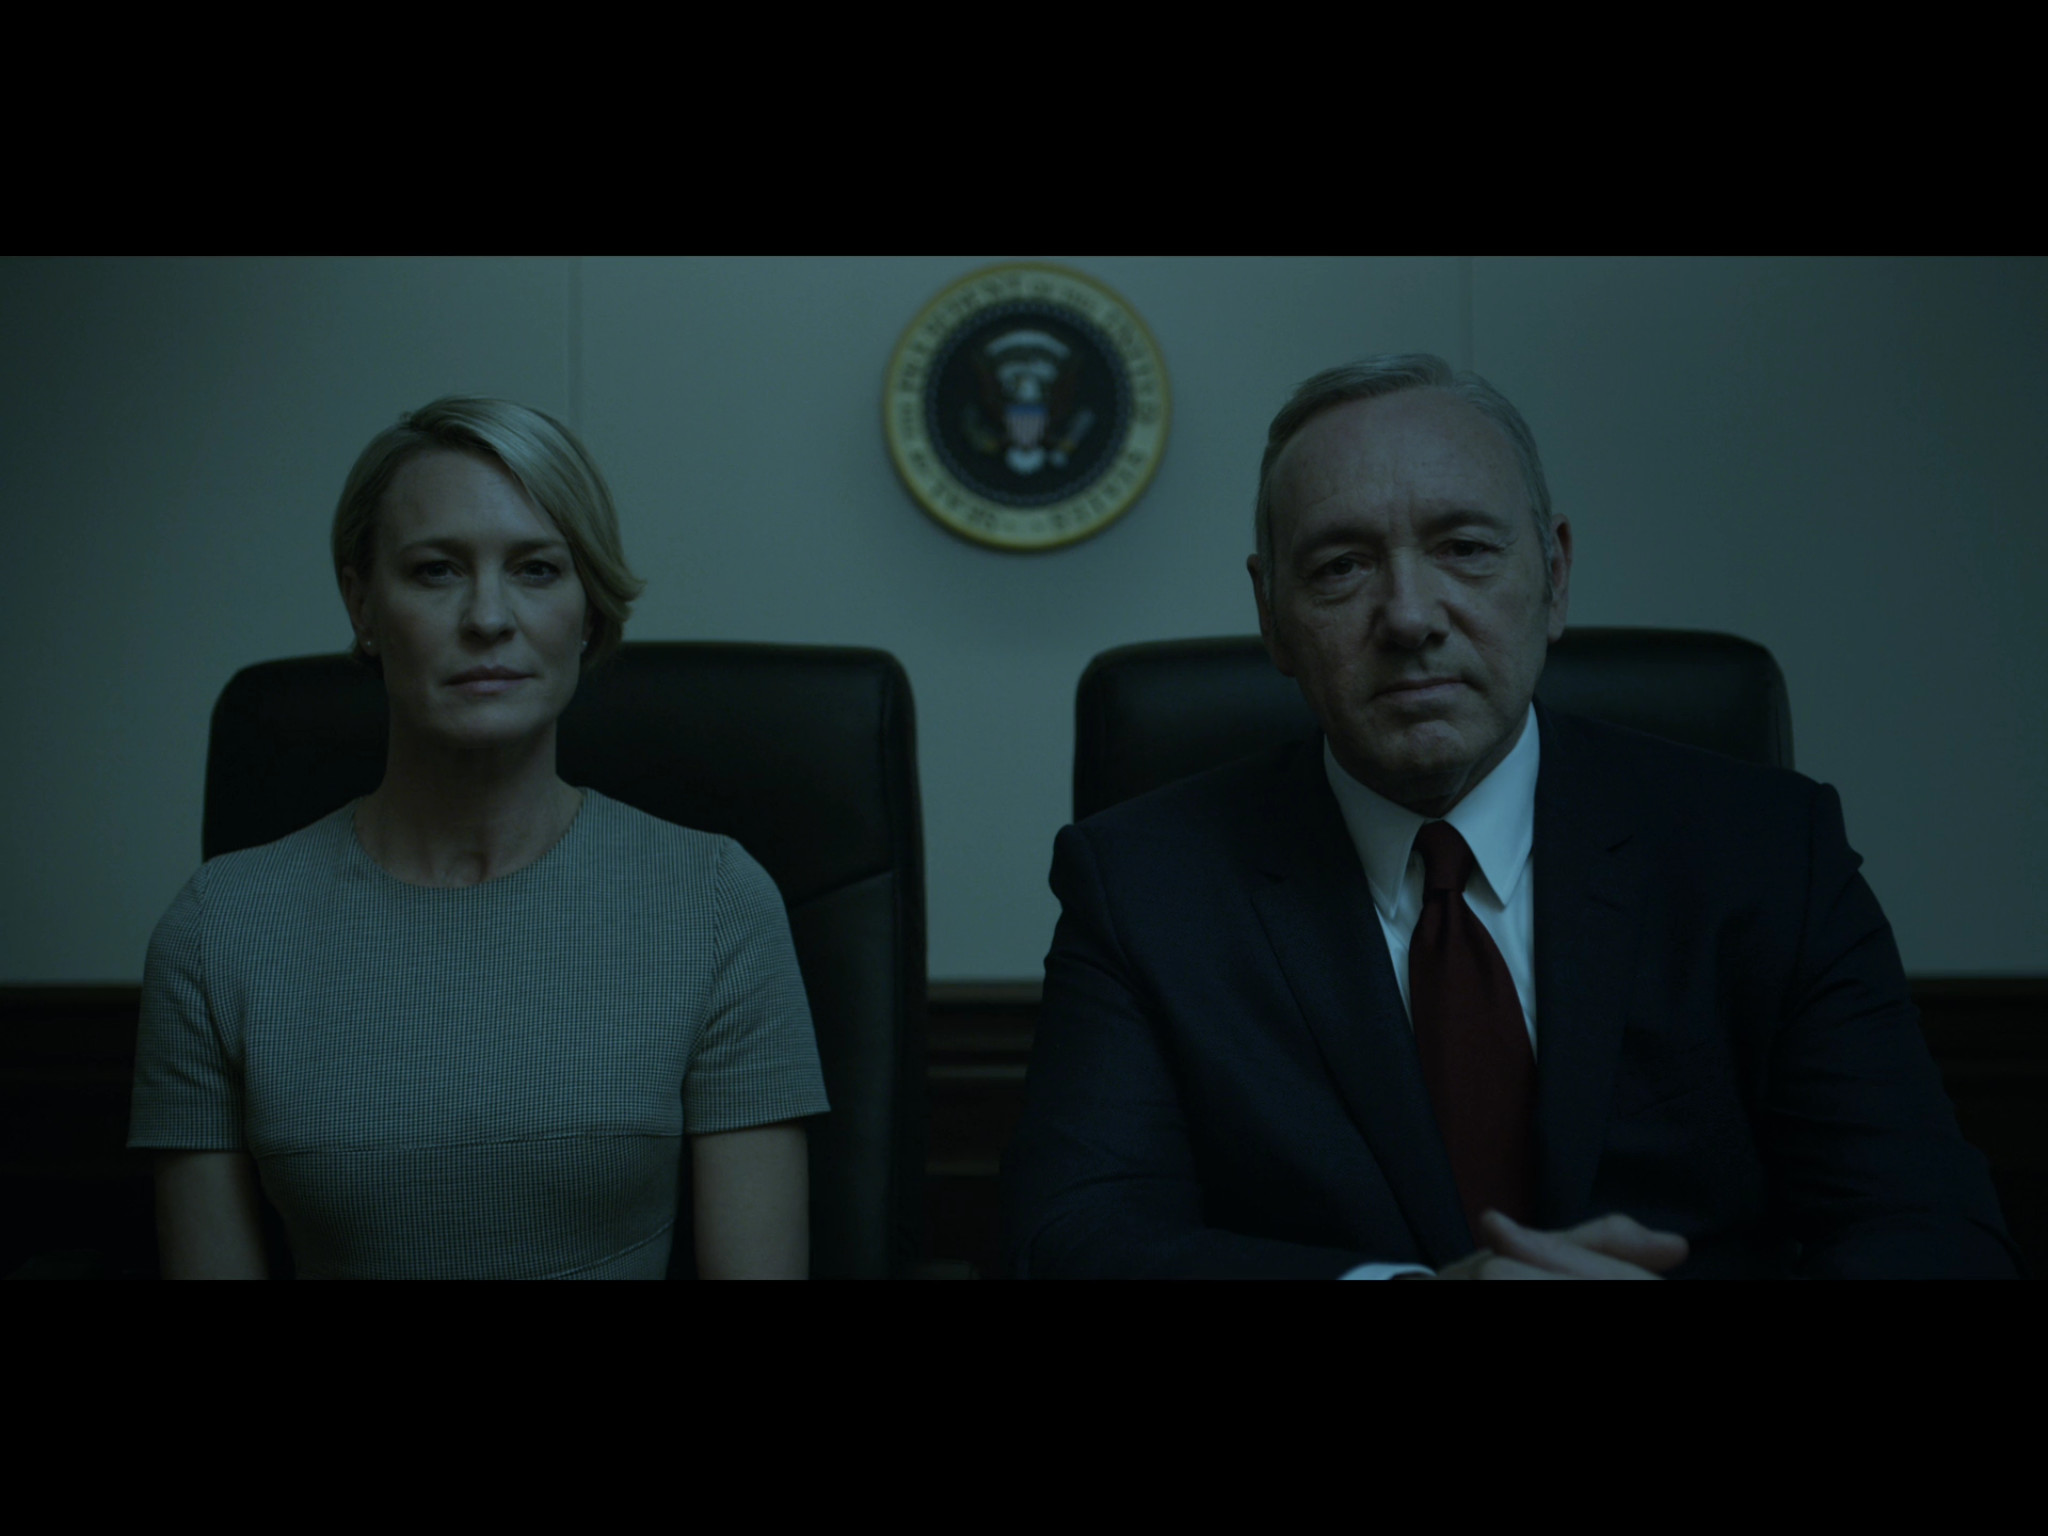 2048x1536 House of Cards Season 4 couple pic